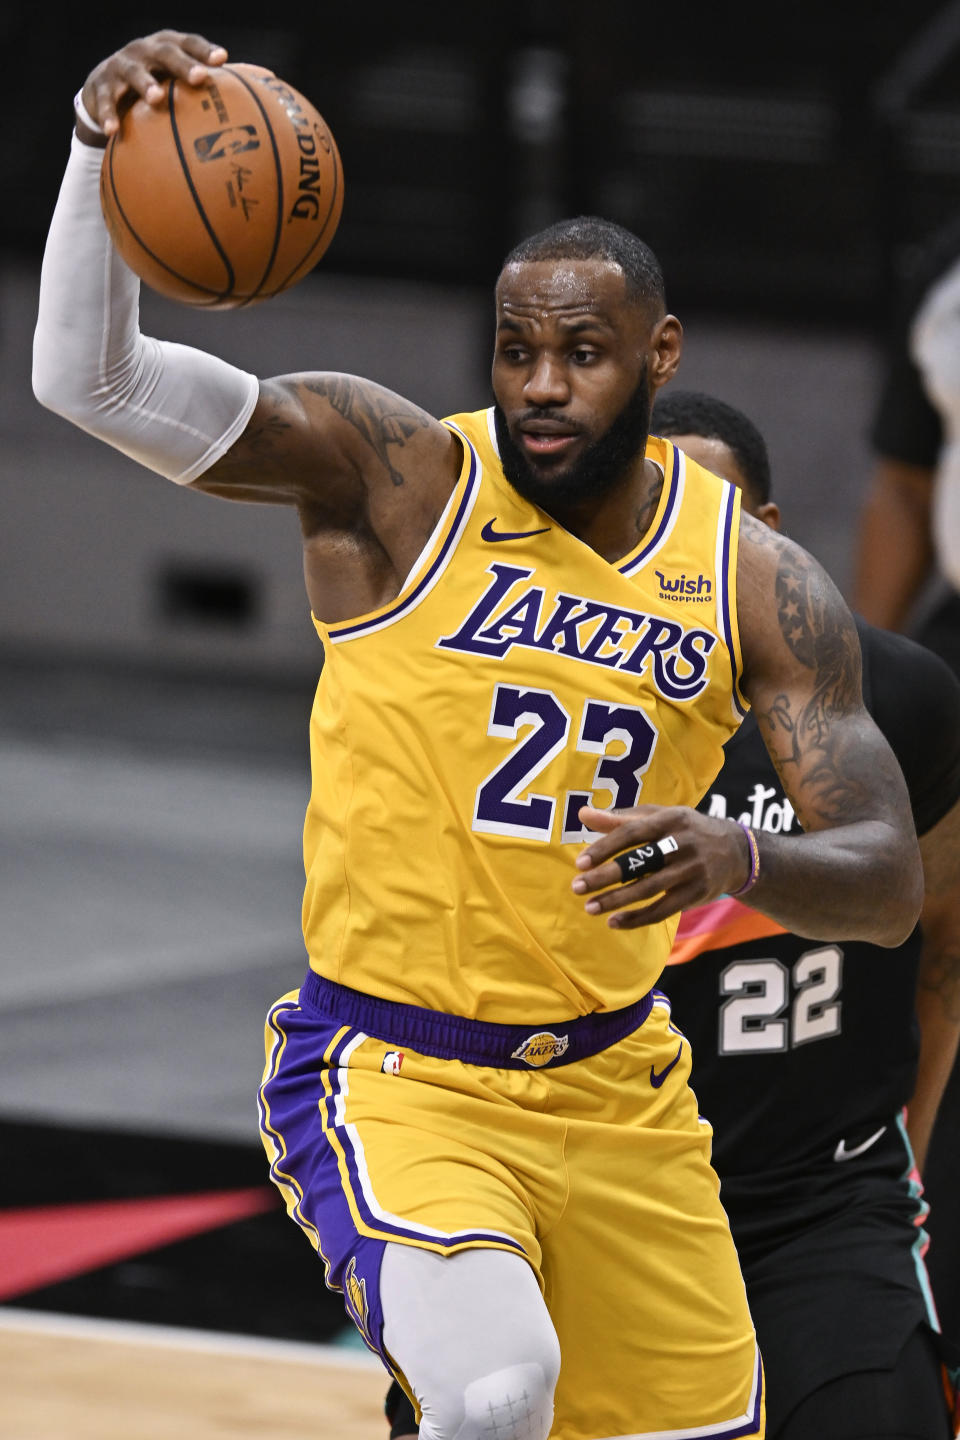 Los Angeles Lakers' LeBron James grabs a rebound during the first half of the team's NBA basketball game against the San Antonio Spurs, Friday, Jan. 1, 2021, in San Antonio. (AP Photo/Darren Abate)